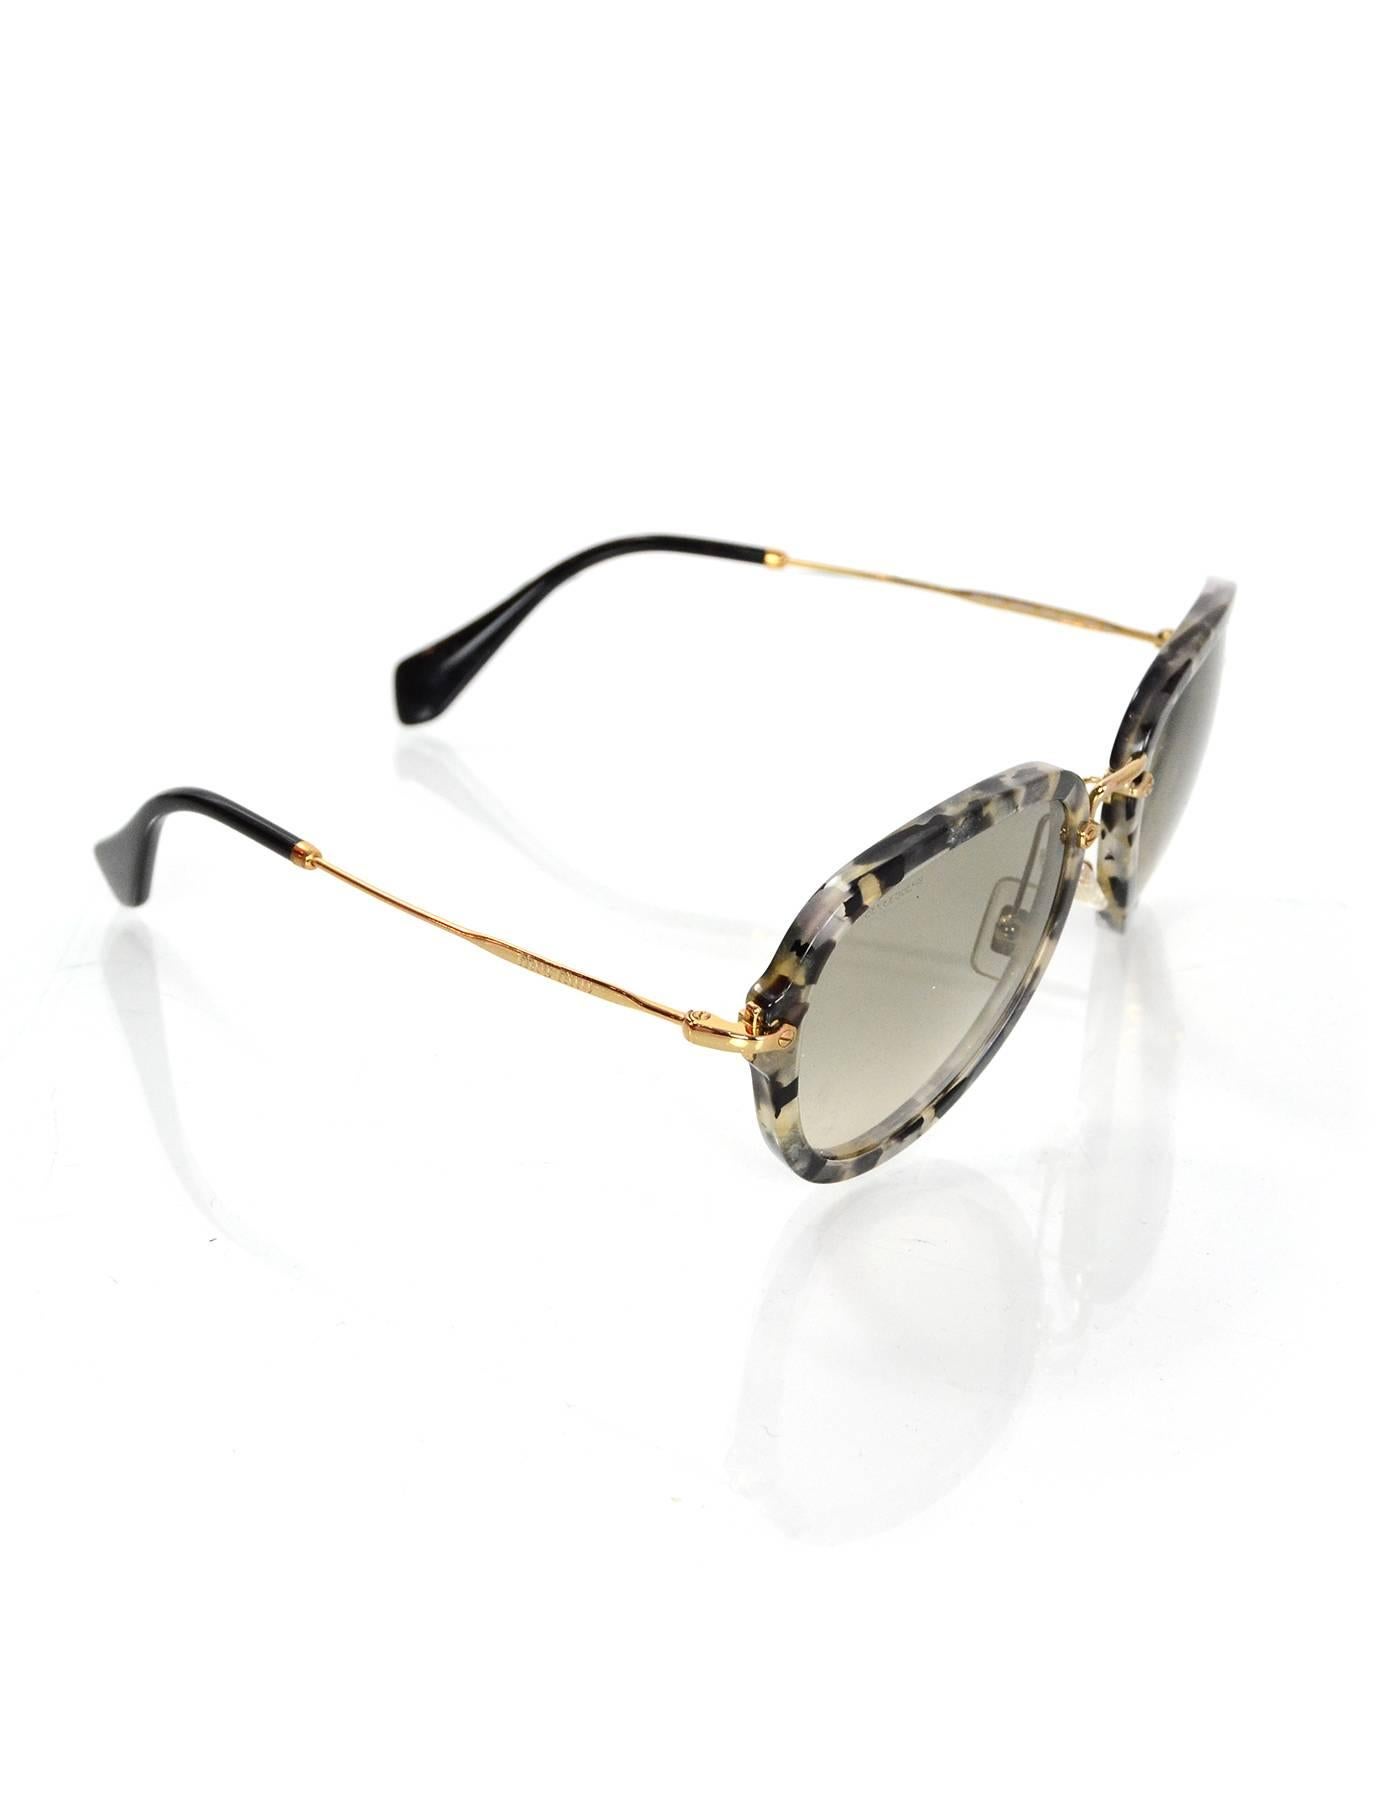 Miu Miu Black and Grey Tortoise Sunglasses

Features aviator style with goldtone wire arms

 Made In: Italy
Color: Black, grey, gold
Materials: Resin, metal
Stamp: Miu Miu Made in Italy 
Overall Condition: Excellent pre-owned condition with the